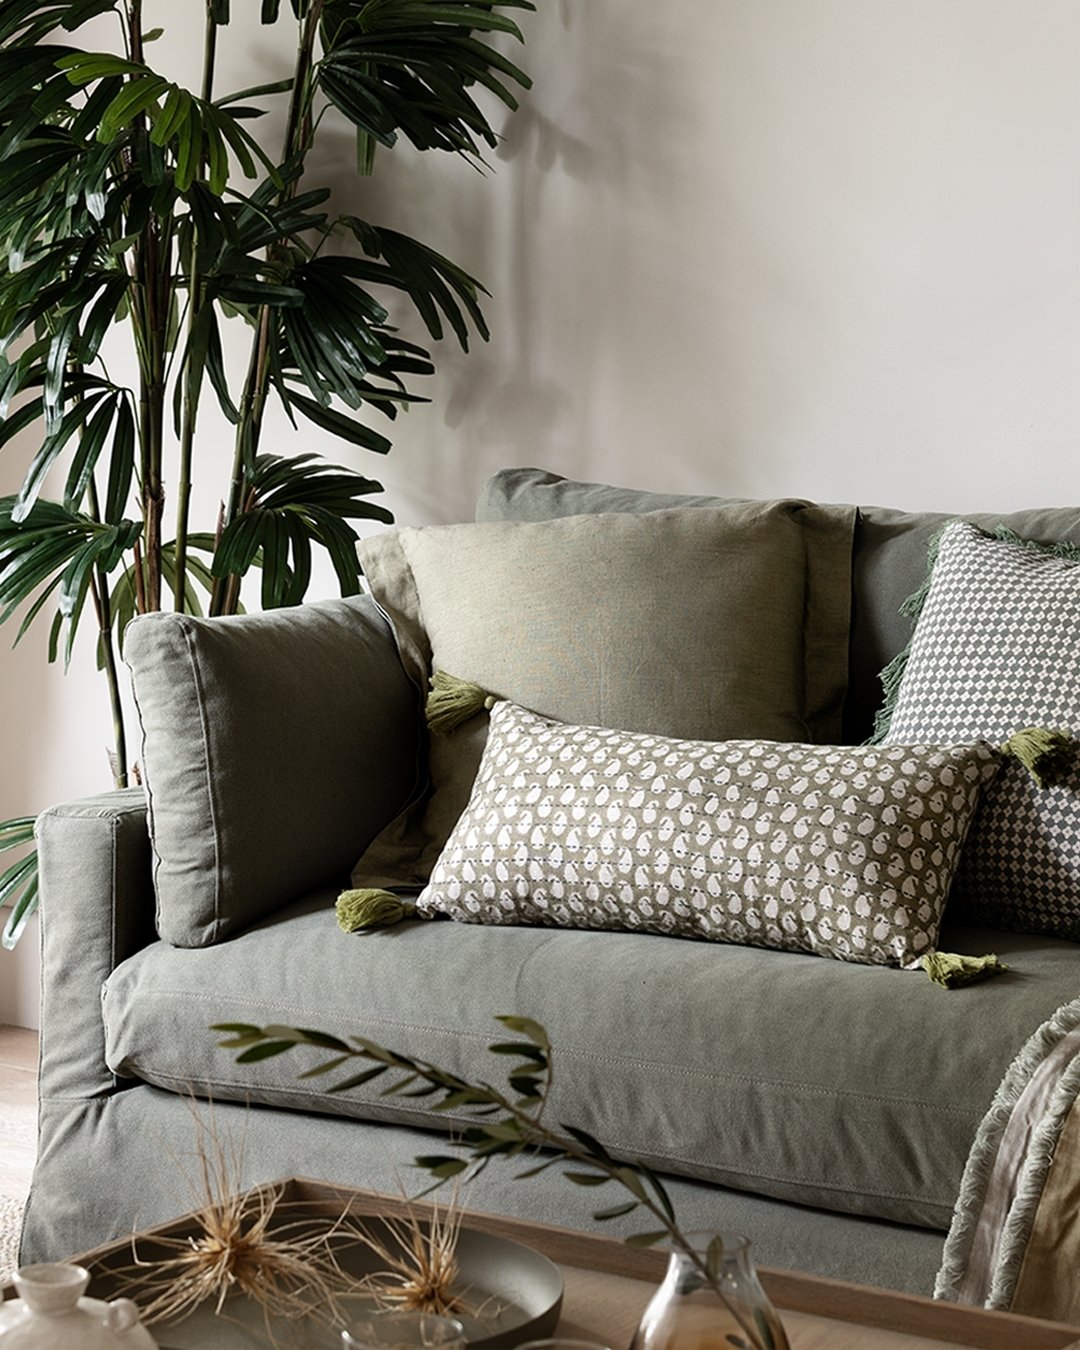 ★ From stunning modular options to the most comfortable, generously sized�3 and 3.5-seaters, we have the perfect sofa to suit your space.

All are in stock and ready for immediate delivery.

Explore all sofas today via the link in our bio ✧